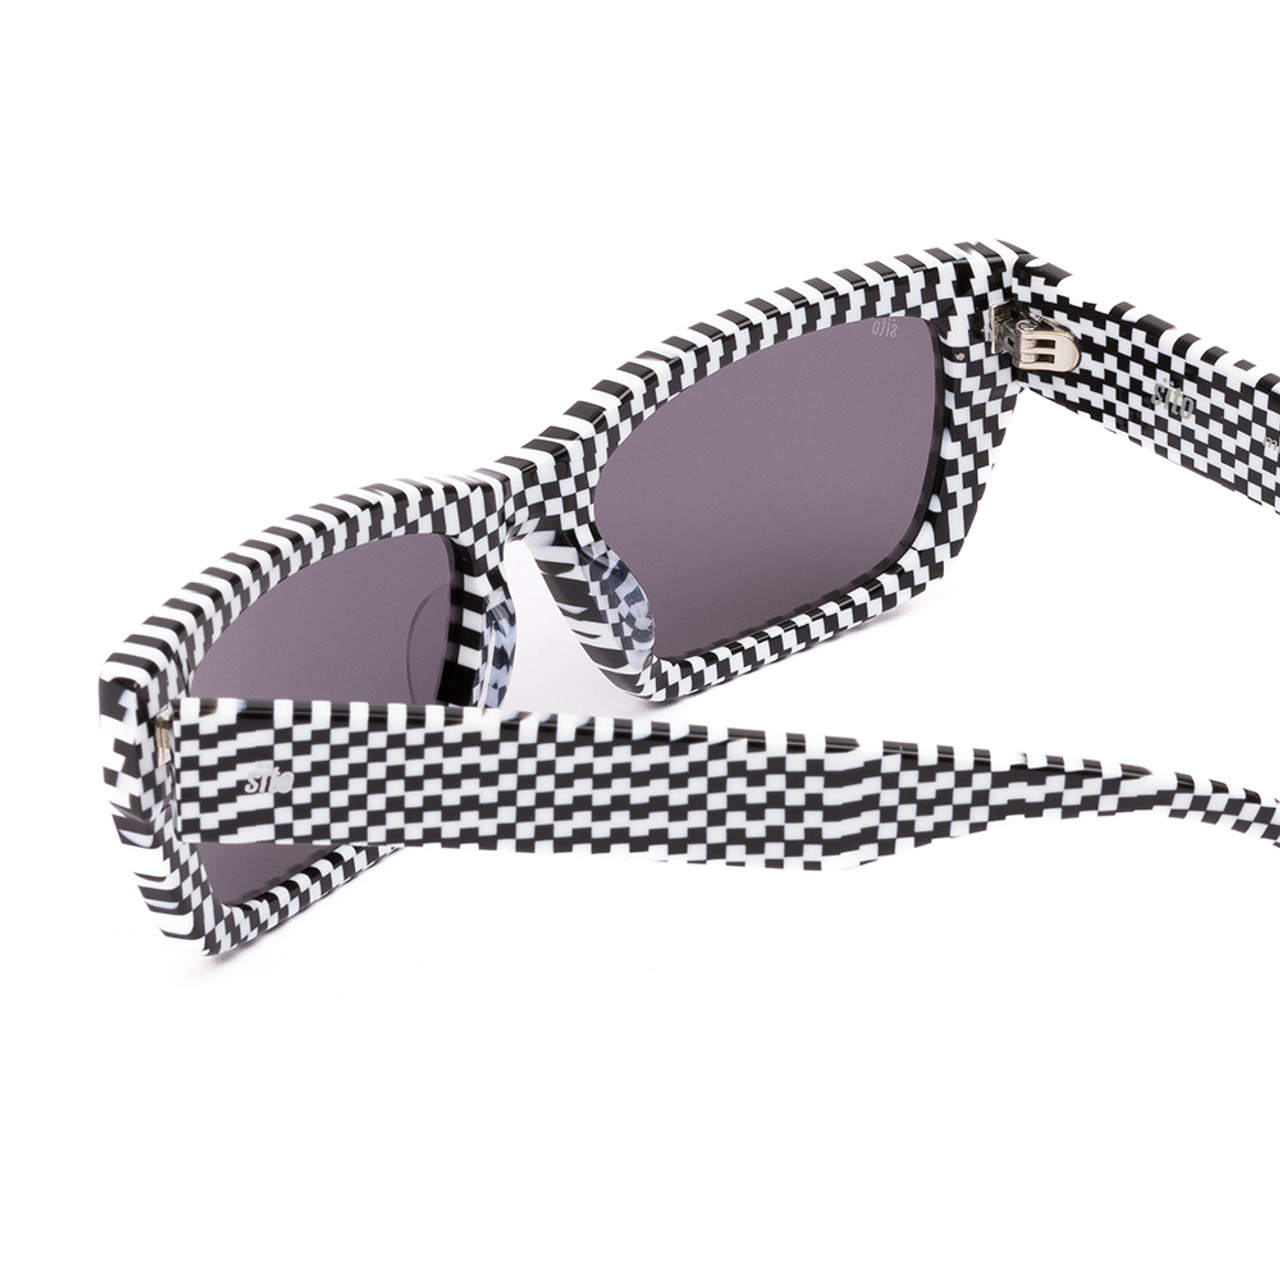 Close Up View of SITO SHADES OUTER LIMITS Unisex Sunglasses in Black White Checker/Iron Gray 54mm